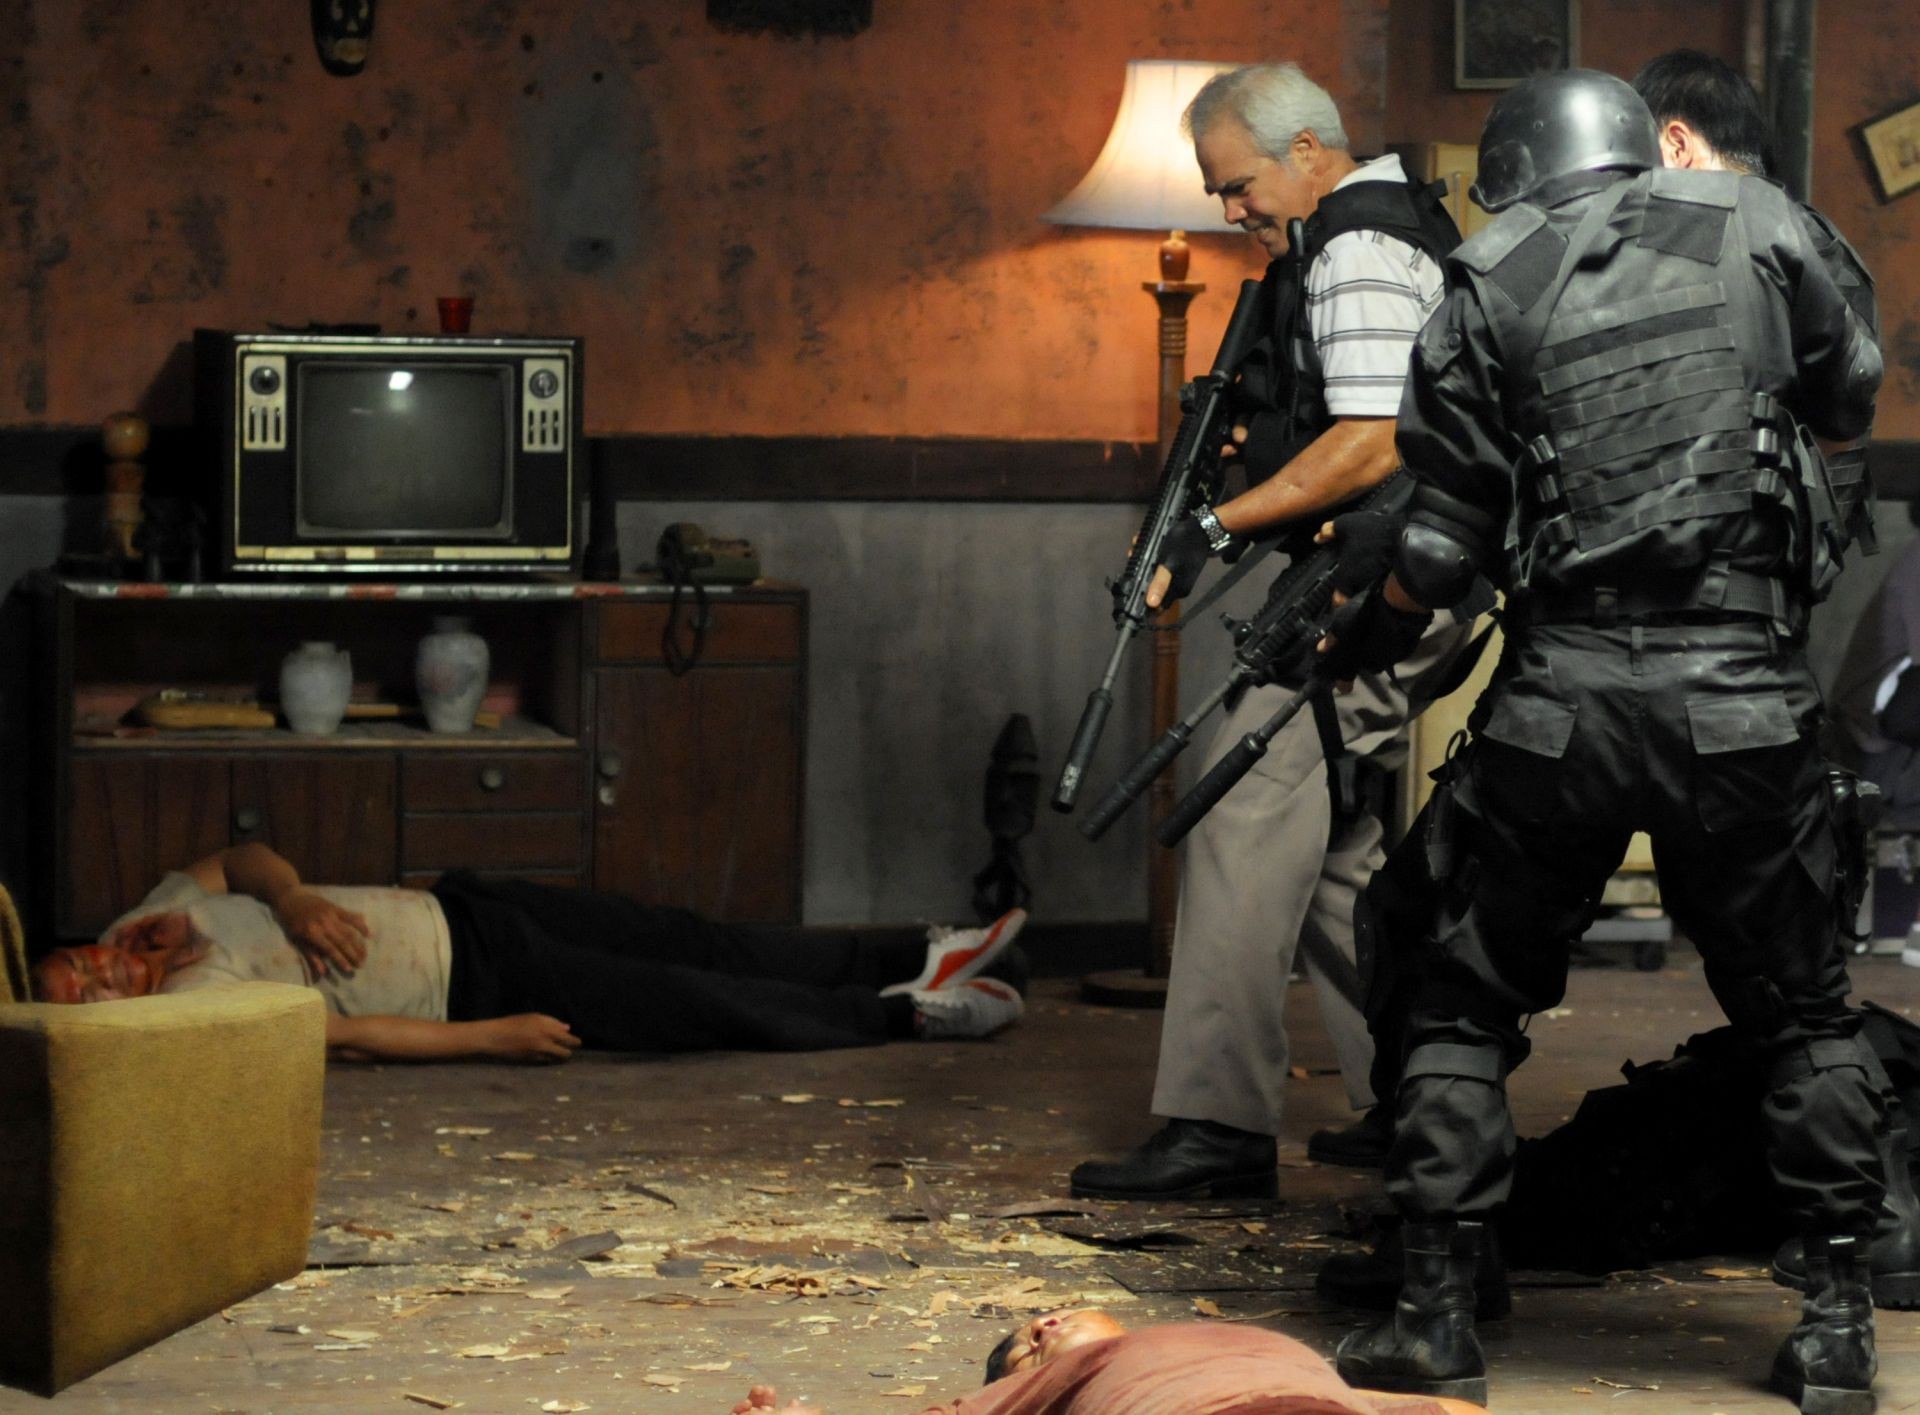 Pierre Gruno in Sny Pictures Classics' The Raid: Redemption (2012)